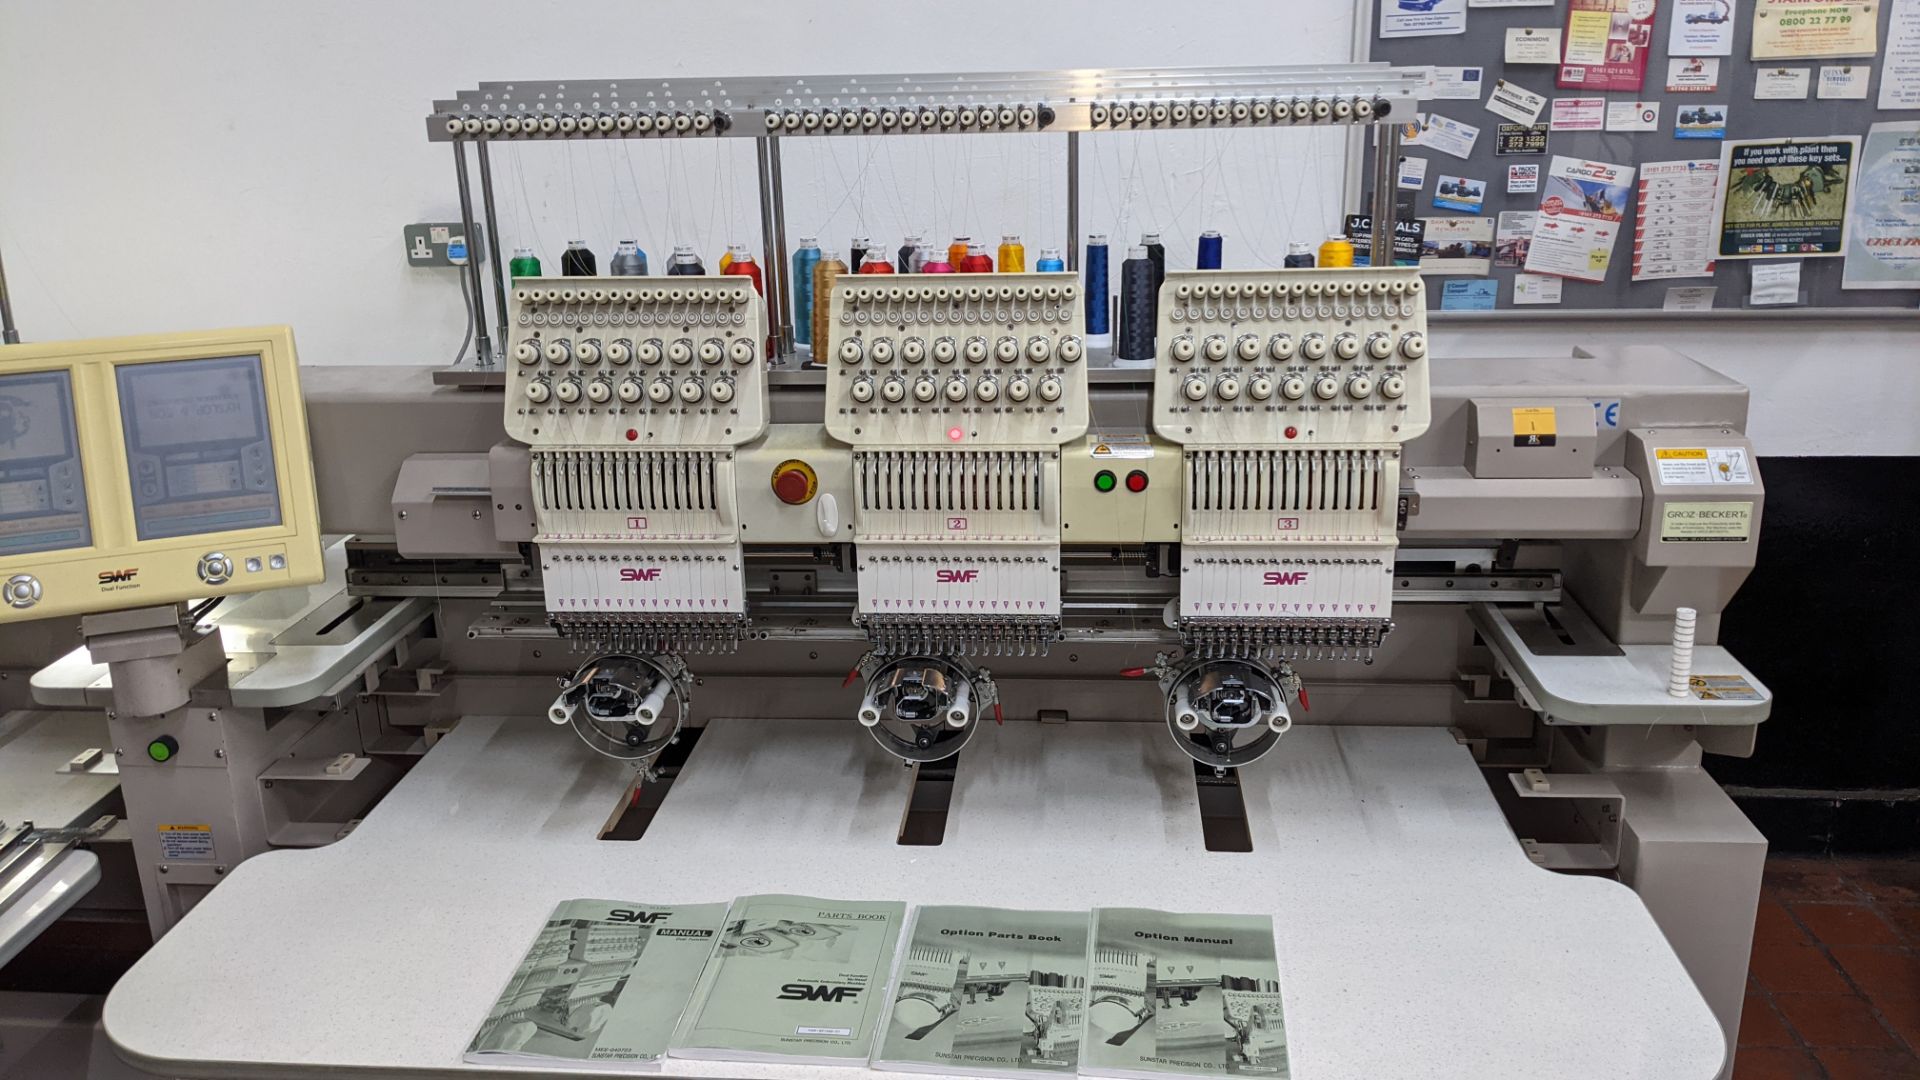 Sunstar Precision Co SWF dual function 6-head automatic embroidery machine, model SWF/HC-UH1506D-45. - Image 22 of 60